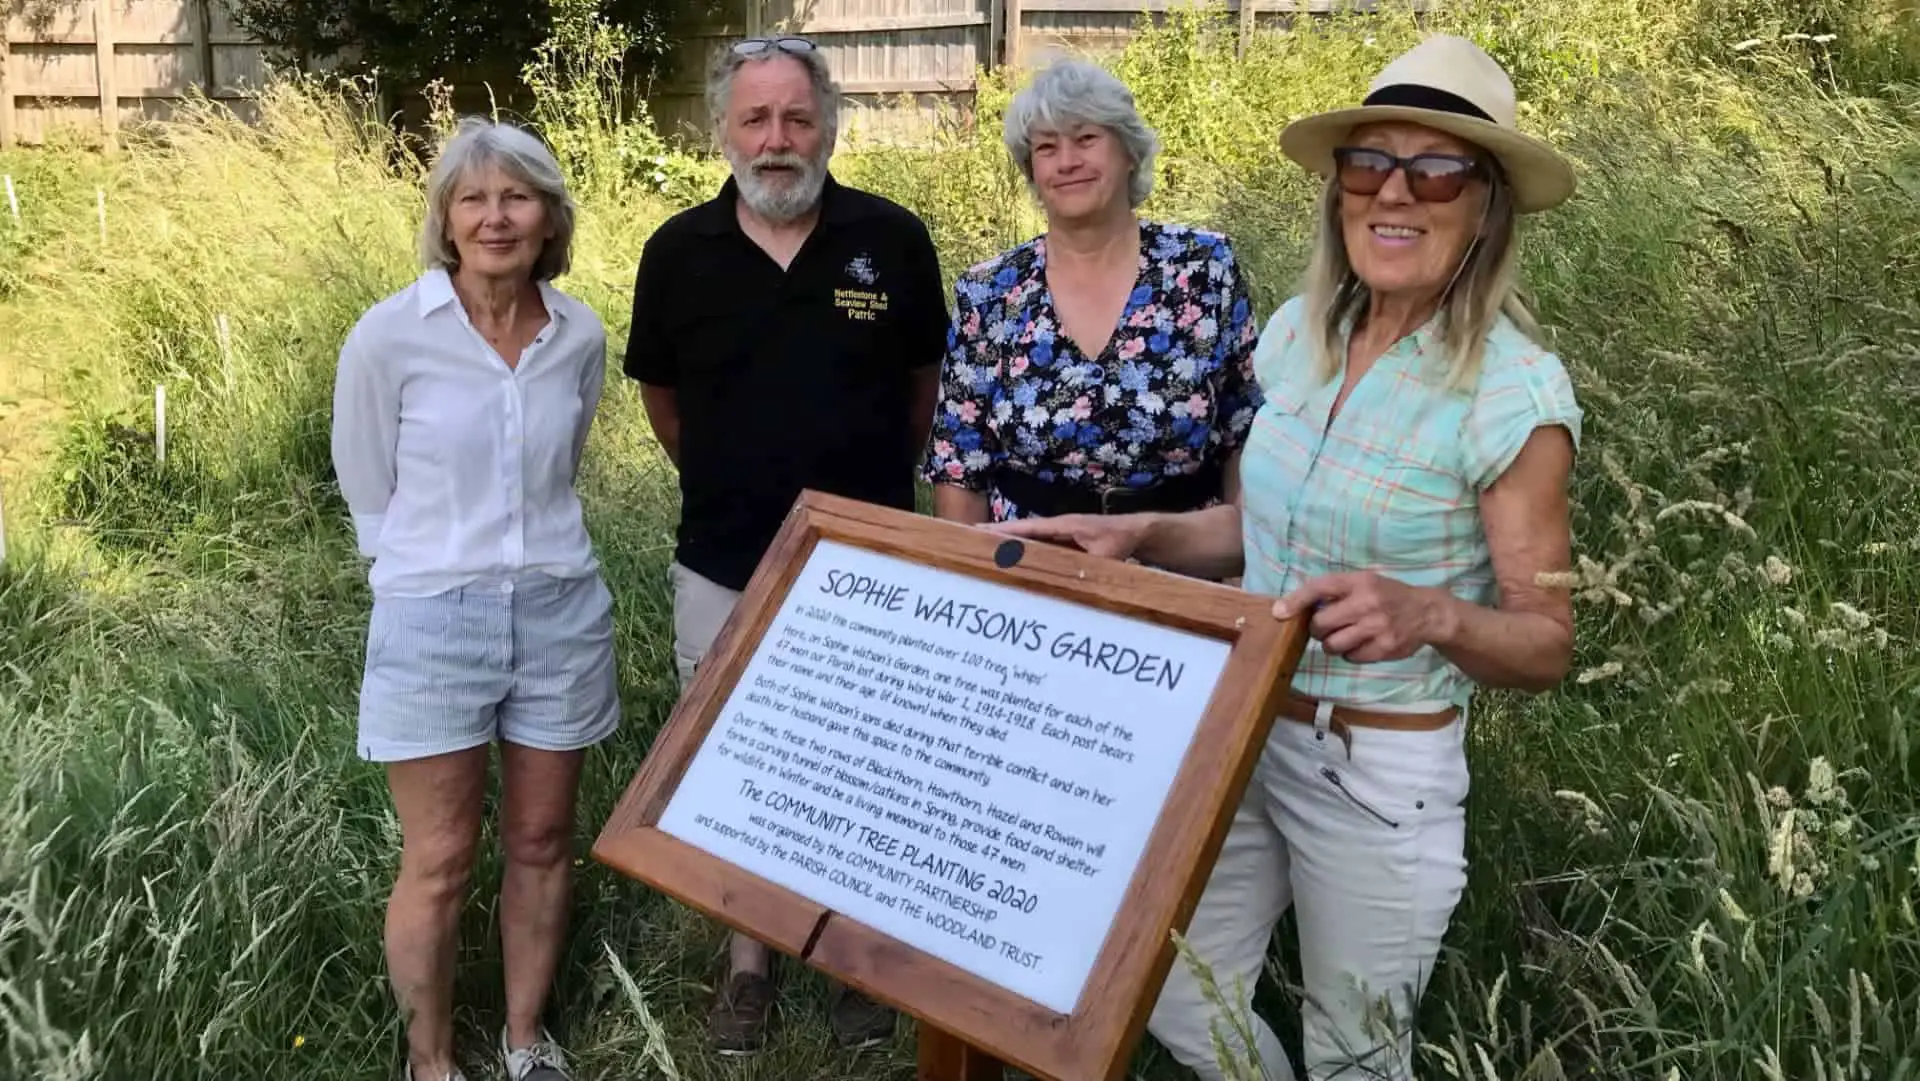 Left to right, Lynn Stack (Community Partnership), Patric Maude (Nettlestone and Seaview Shed ), Rebecca Hardie (Nettlestone and Seaview Parish Council) and Jo King (Open Spaces initiative)